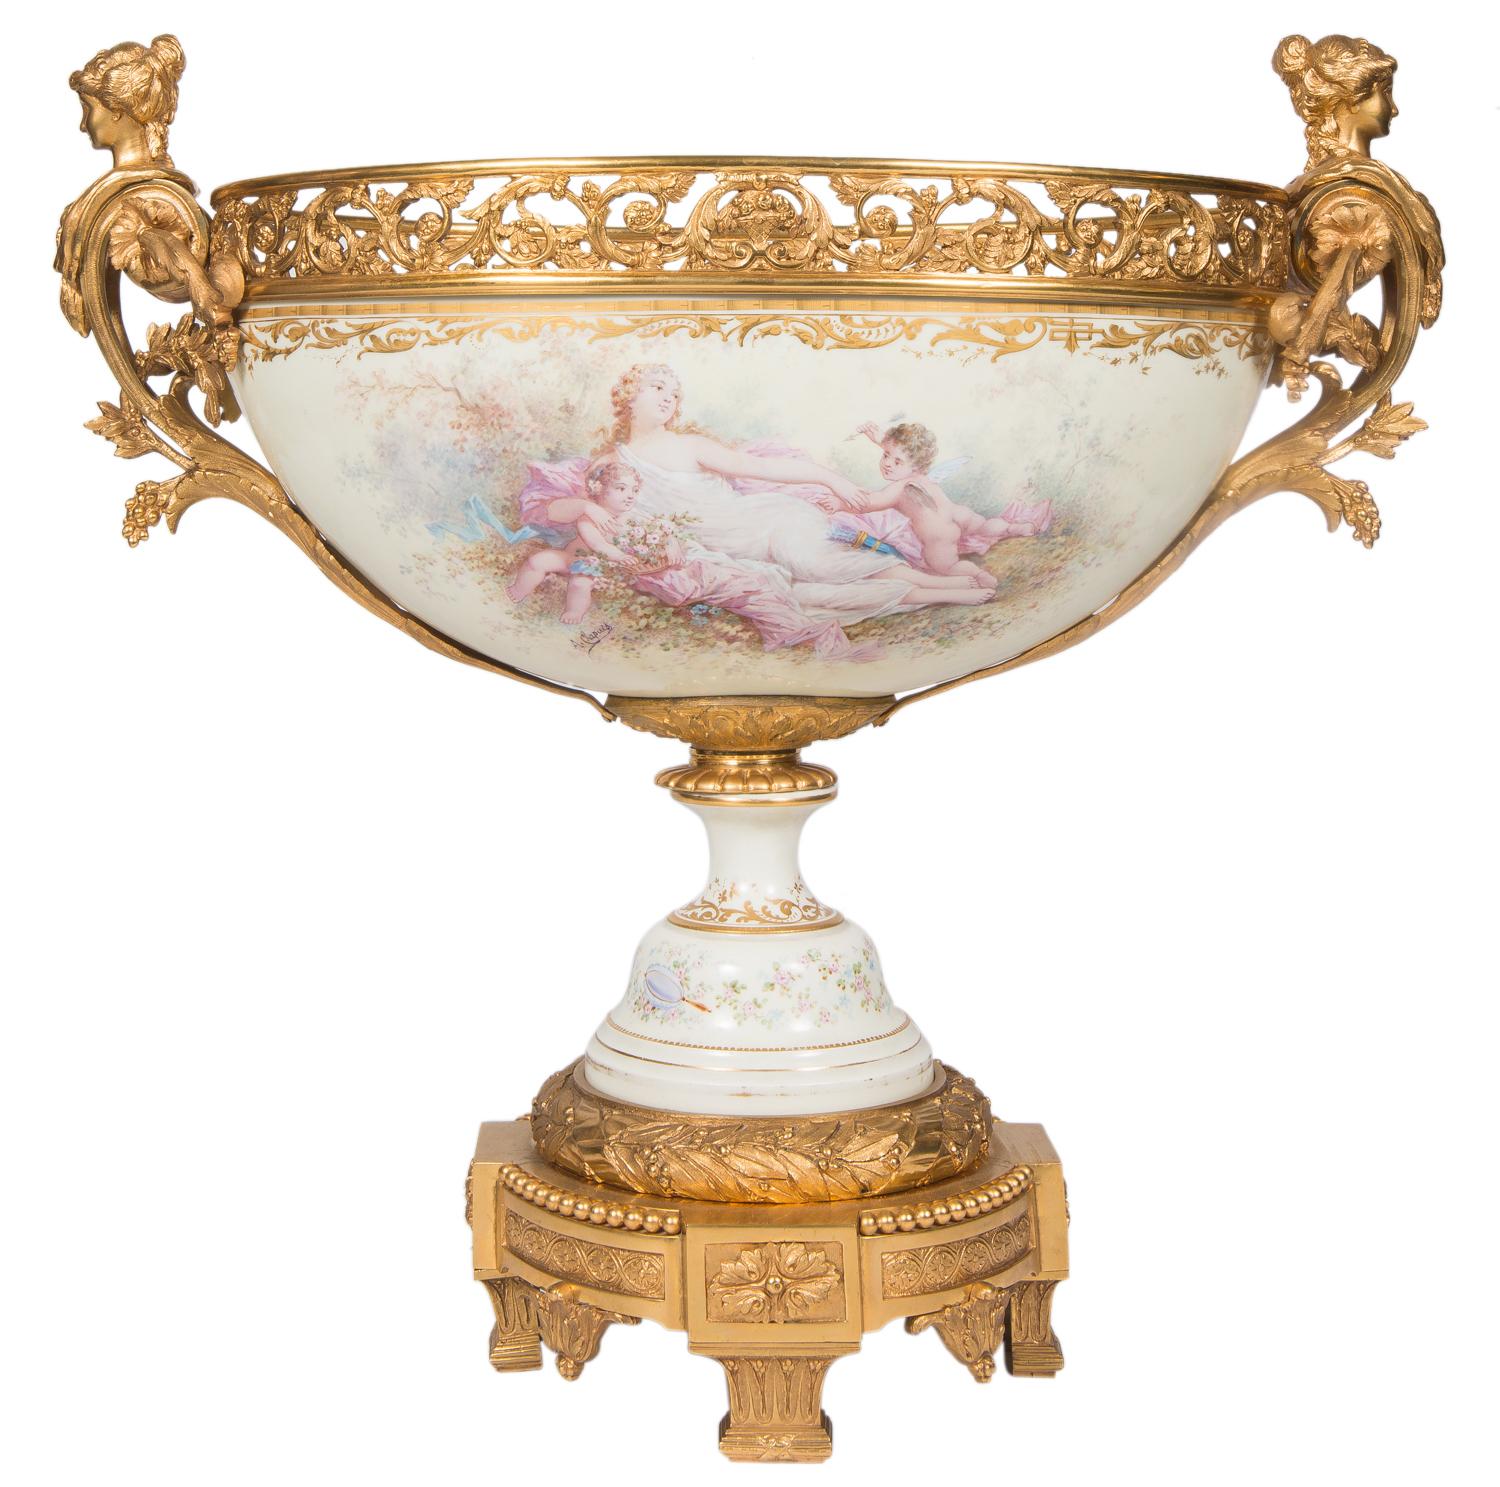 A very impressive, beautifully painted Sevres style porcelain garniture, having a pair of lidded urns on either side of a large comport, with gilded ormolu monopodia handles, the painted scenes depicting classical reclining female figures with